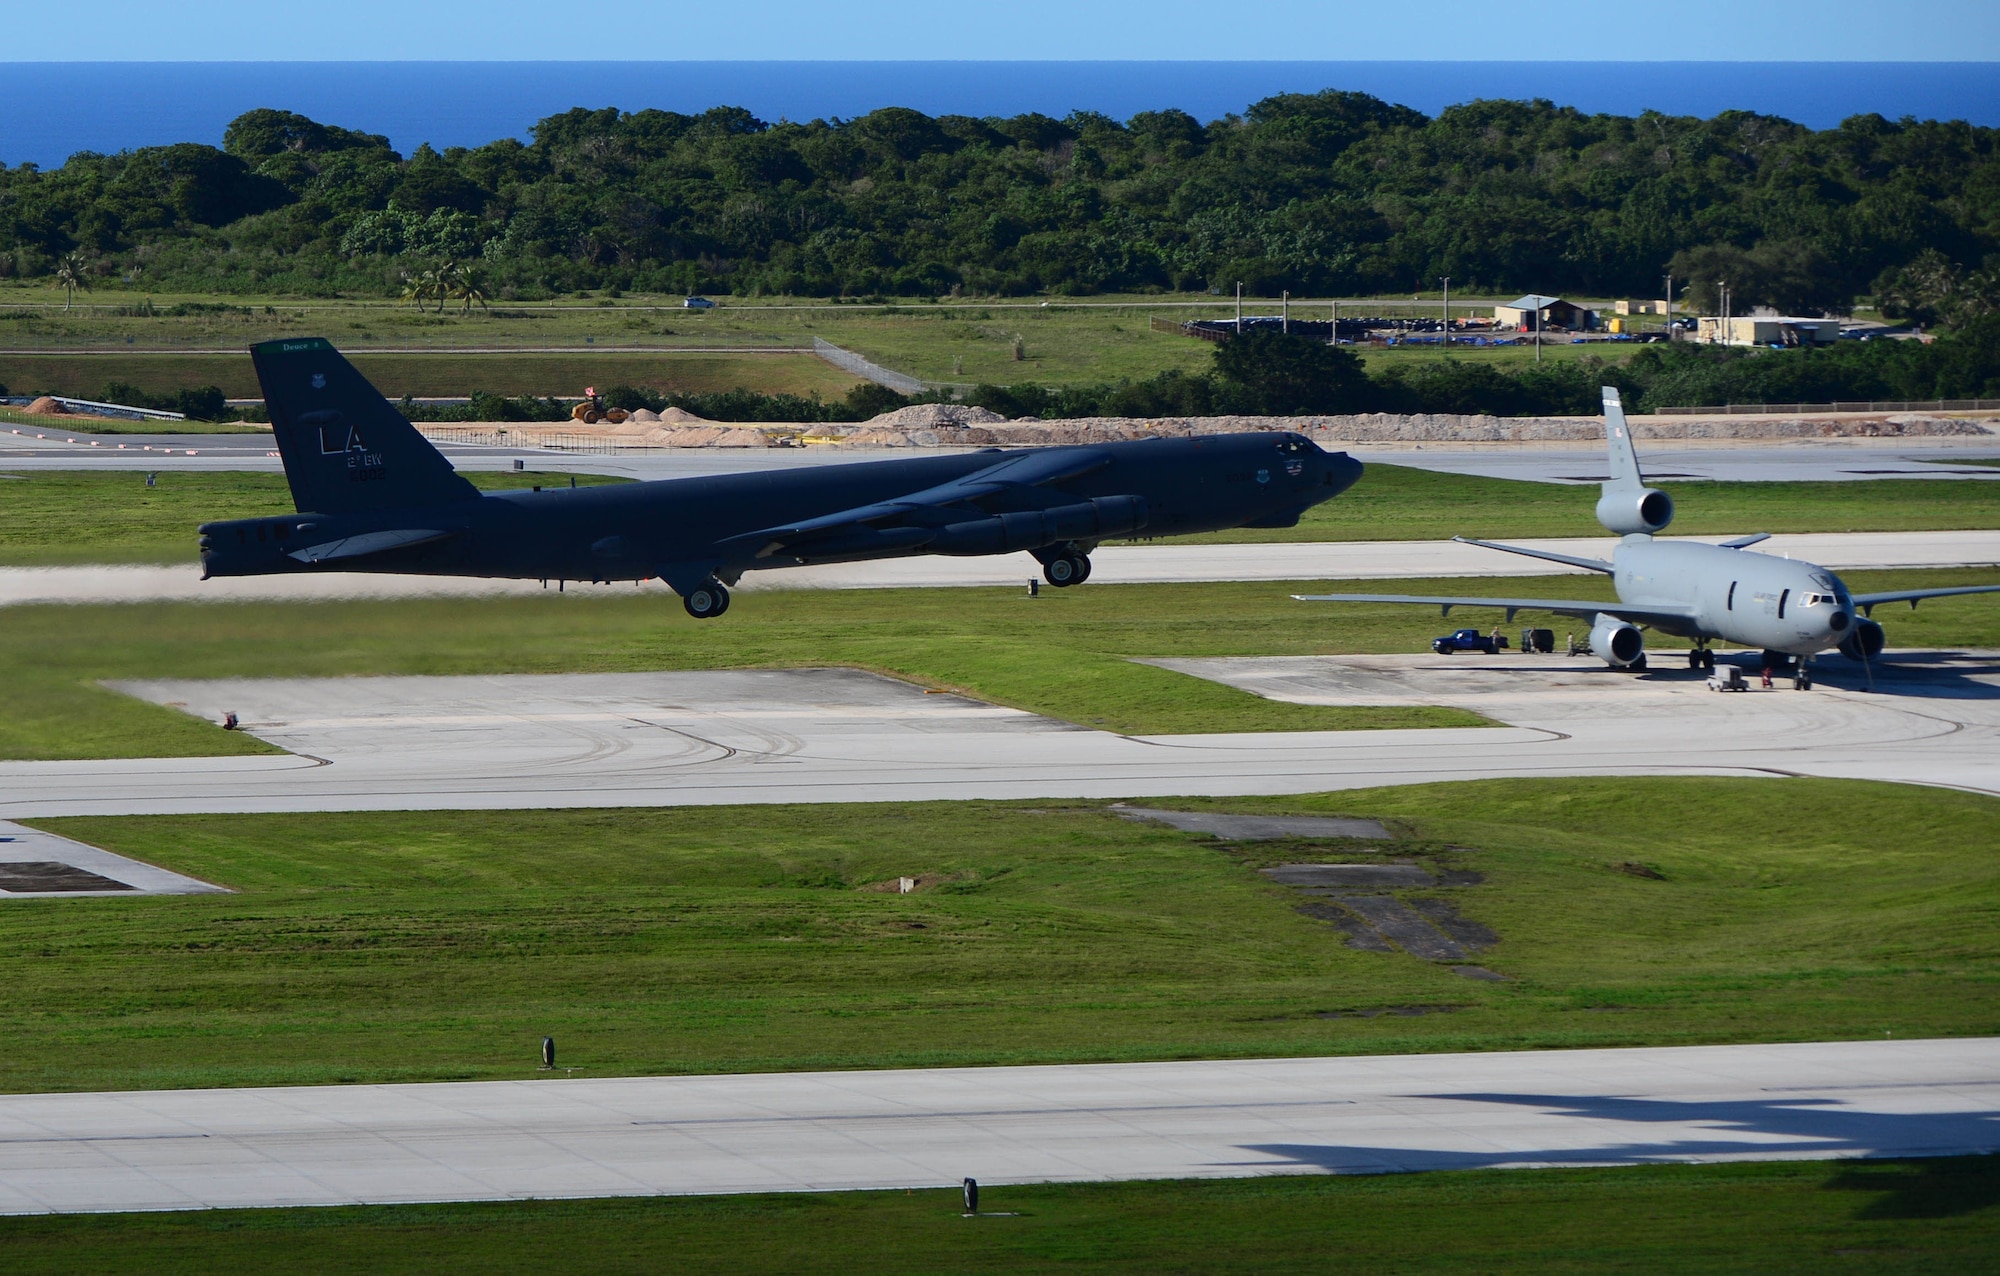 A B-52H Stratofortress from Barksdale Air Force Base, La., lifts off from an Andersen AFB, Guam runway while a KC-10 Extender is parked on the ramp, Sept. 18, 2014. Several B-52 crews and other 8th Air Force personnel participated in Exercise Valiant Shield, Sept. 15-23 – a biennial U.S. joint-forces training exercise in the Pacific region – while deployed to Andersen as part of the continuous bomber presence there. (U.S. Marine Corps photo by Lance Cpl. Abbey Perria/Released)